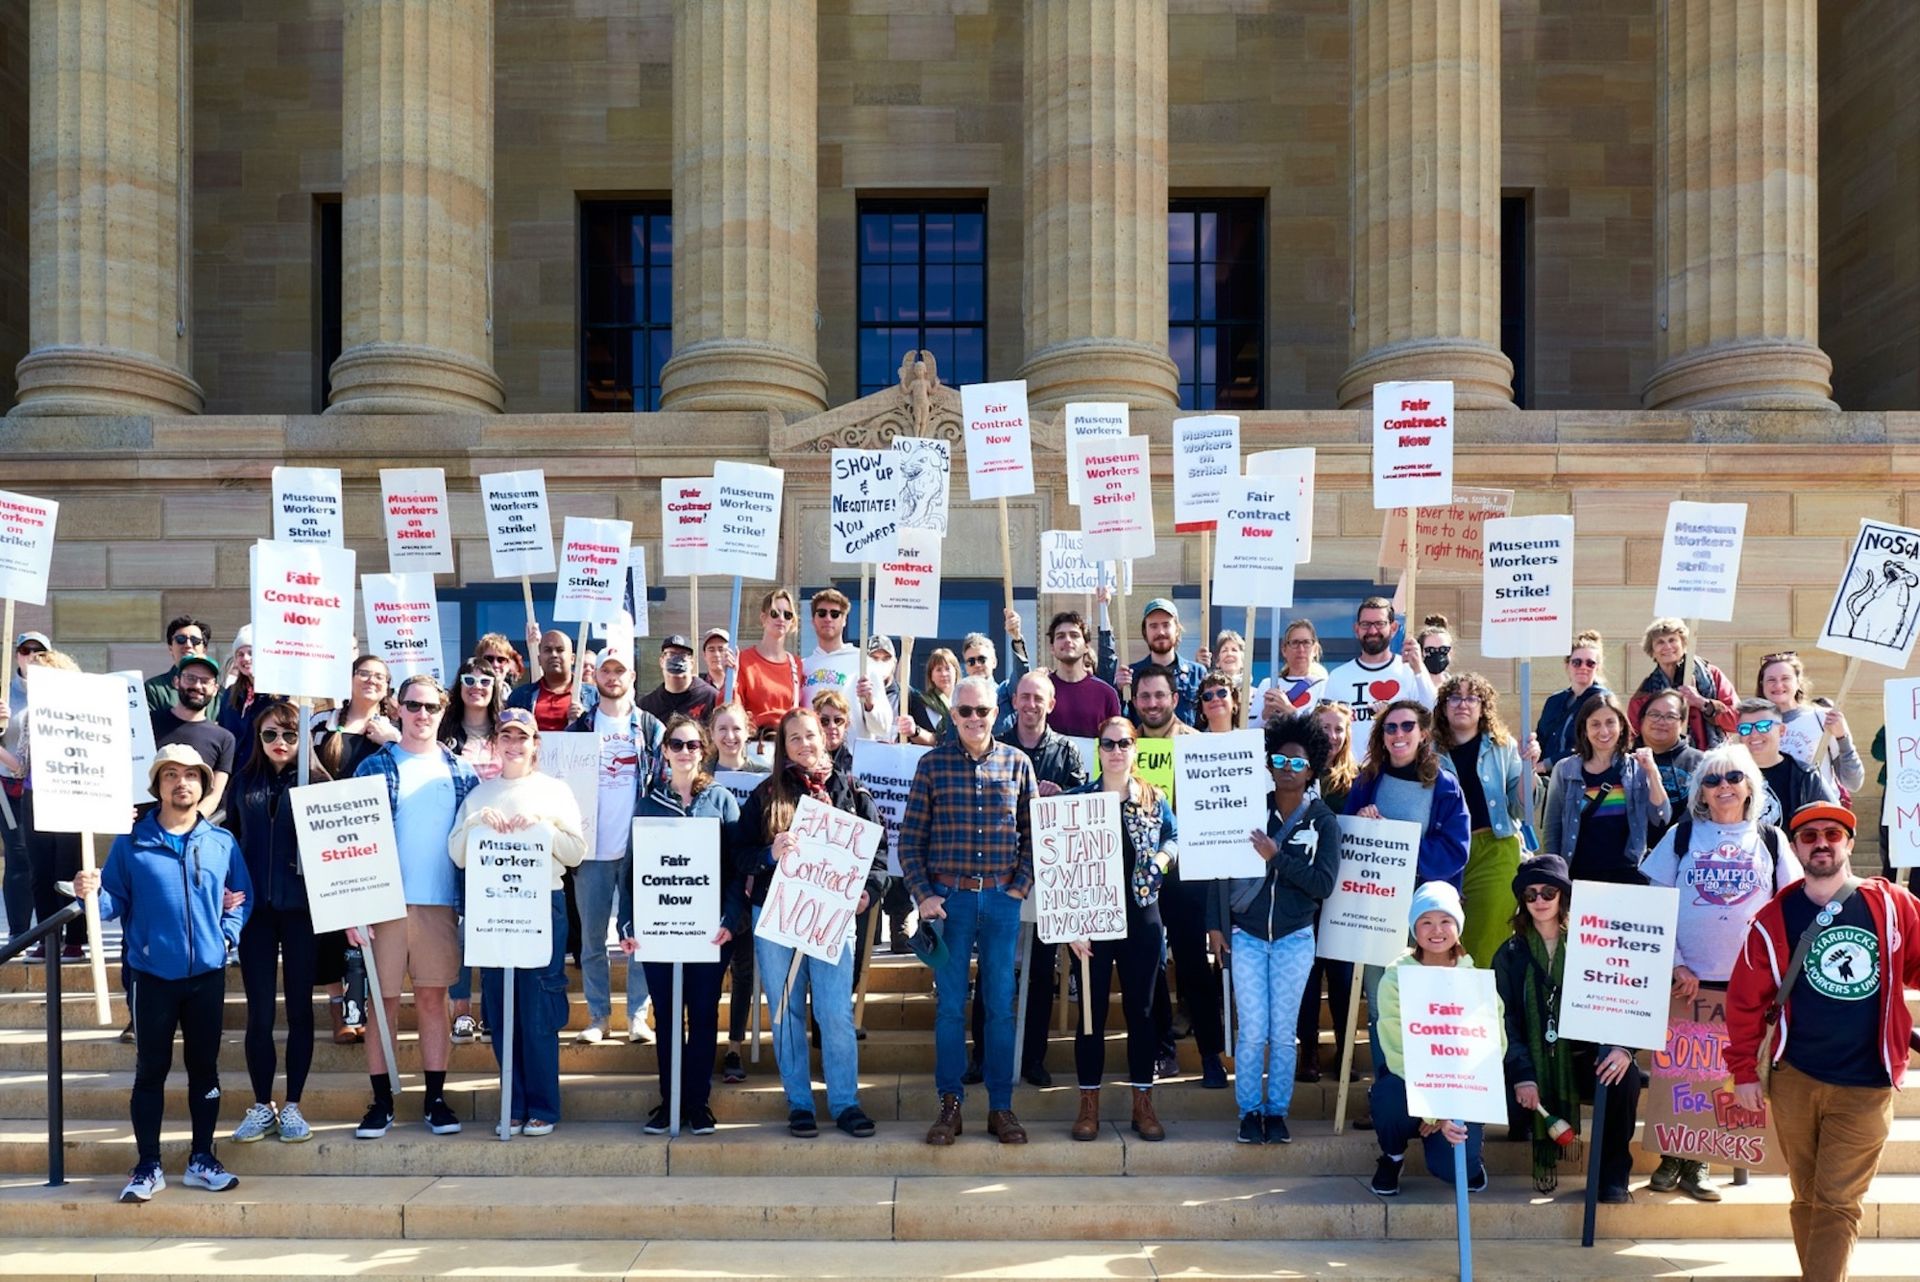 Members of the Philadelphia Museum of Art union on the steps of the museum Photo by Tim Tiebout